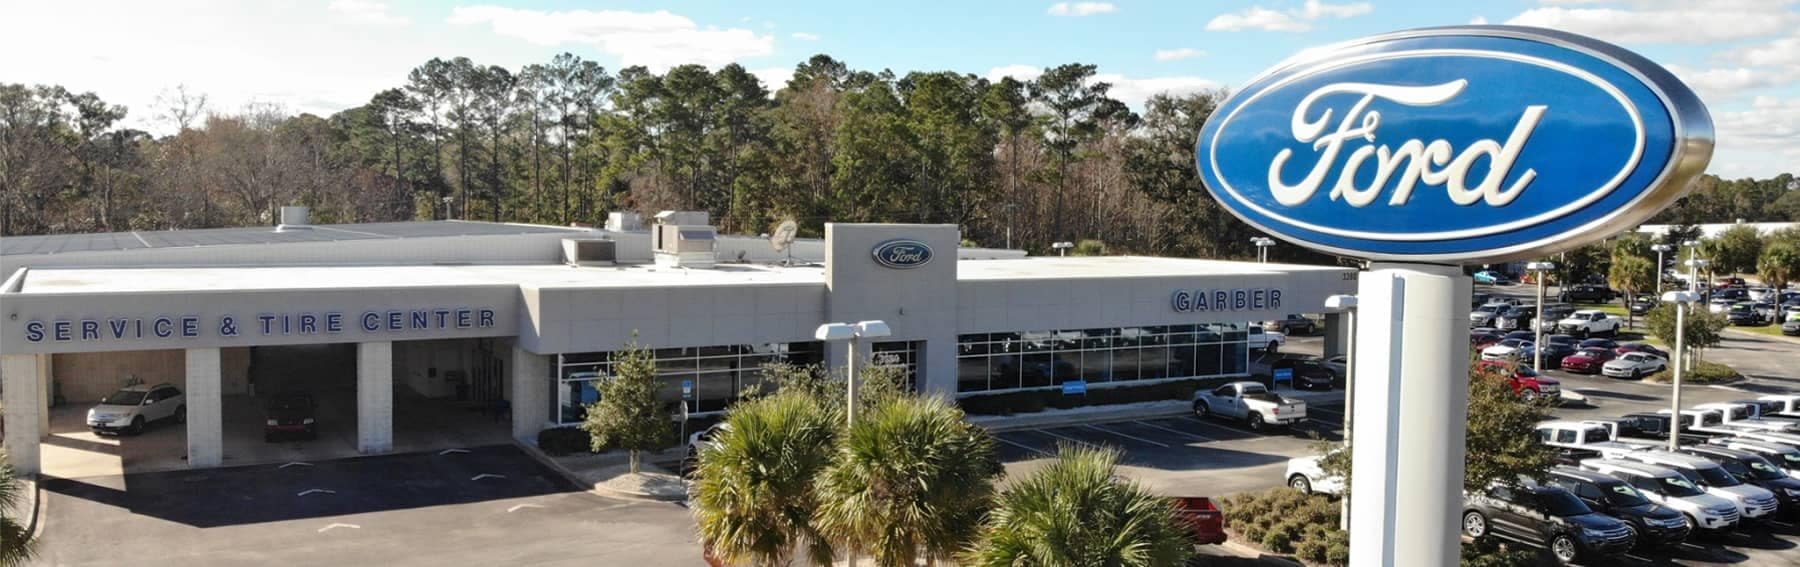 Garber Ford aerial view outside during the day 